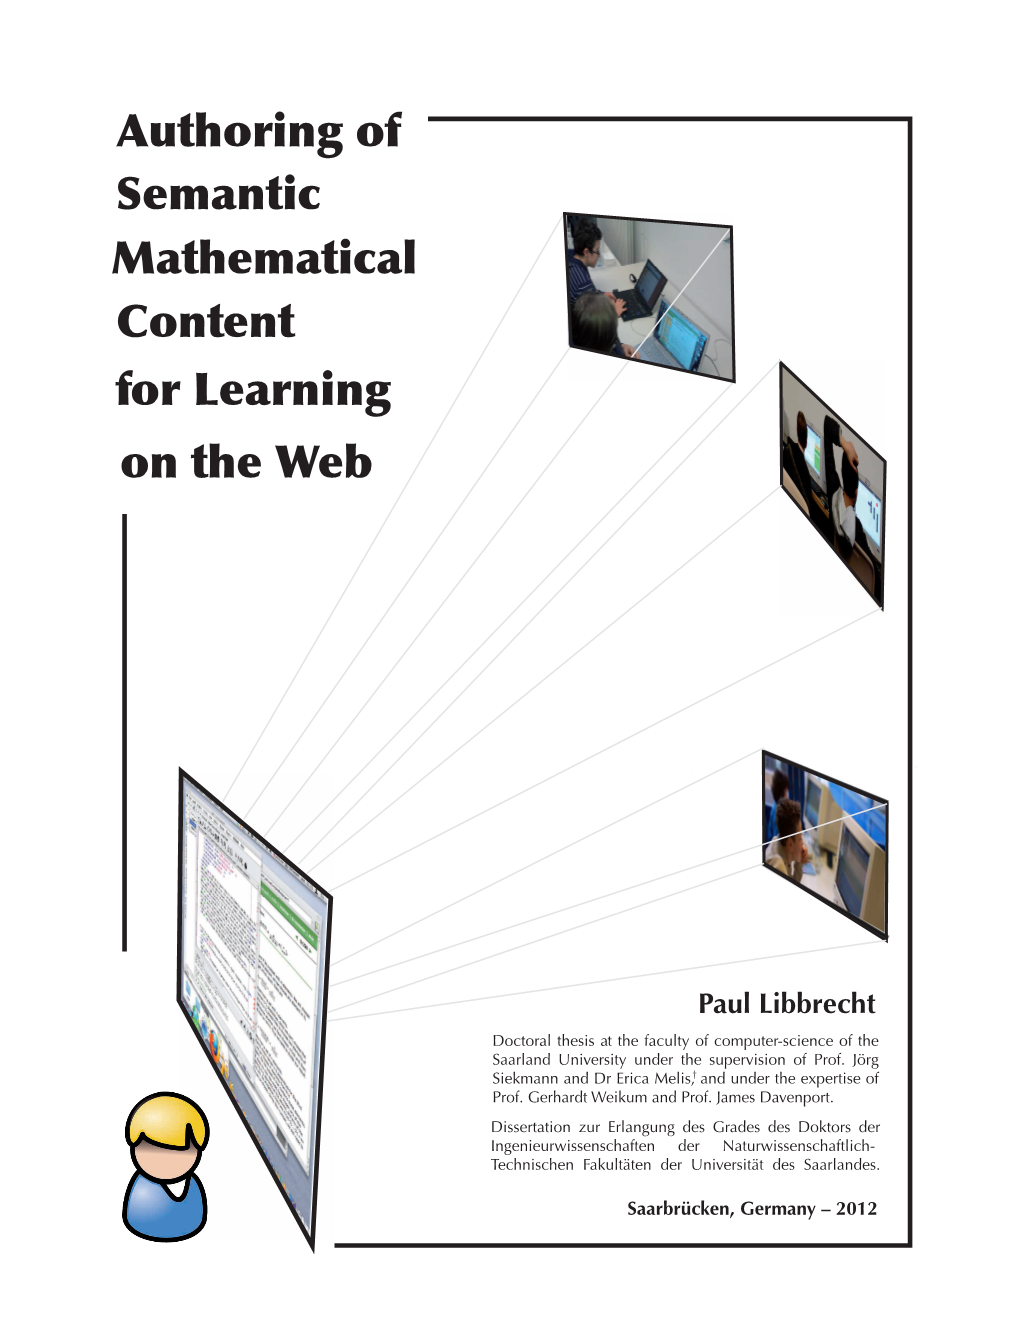 Authoring of Semantic Mathematical Content for Learning on the Web